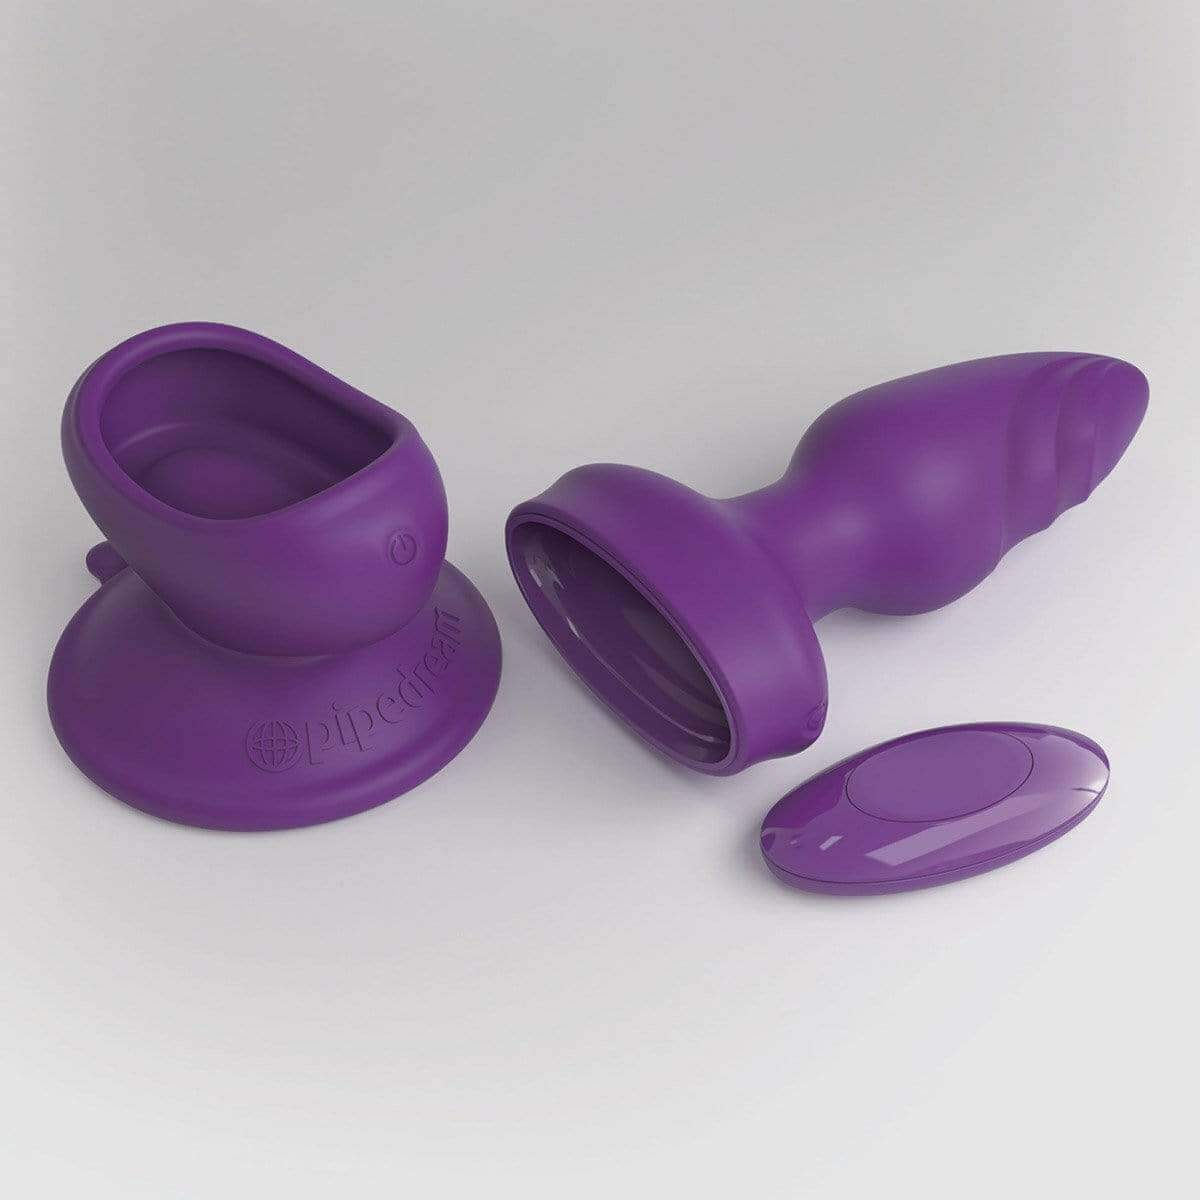 Wall Banger Plug - Purple - Thorn & Feather Sex Toy Canada